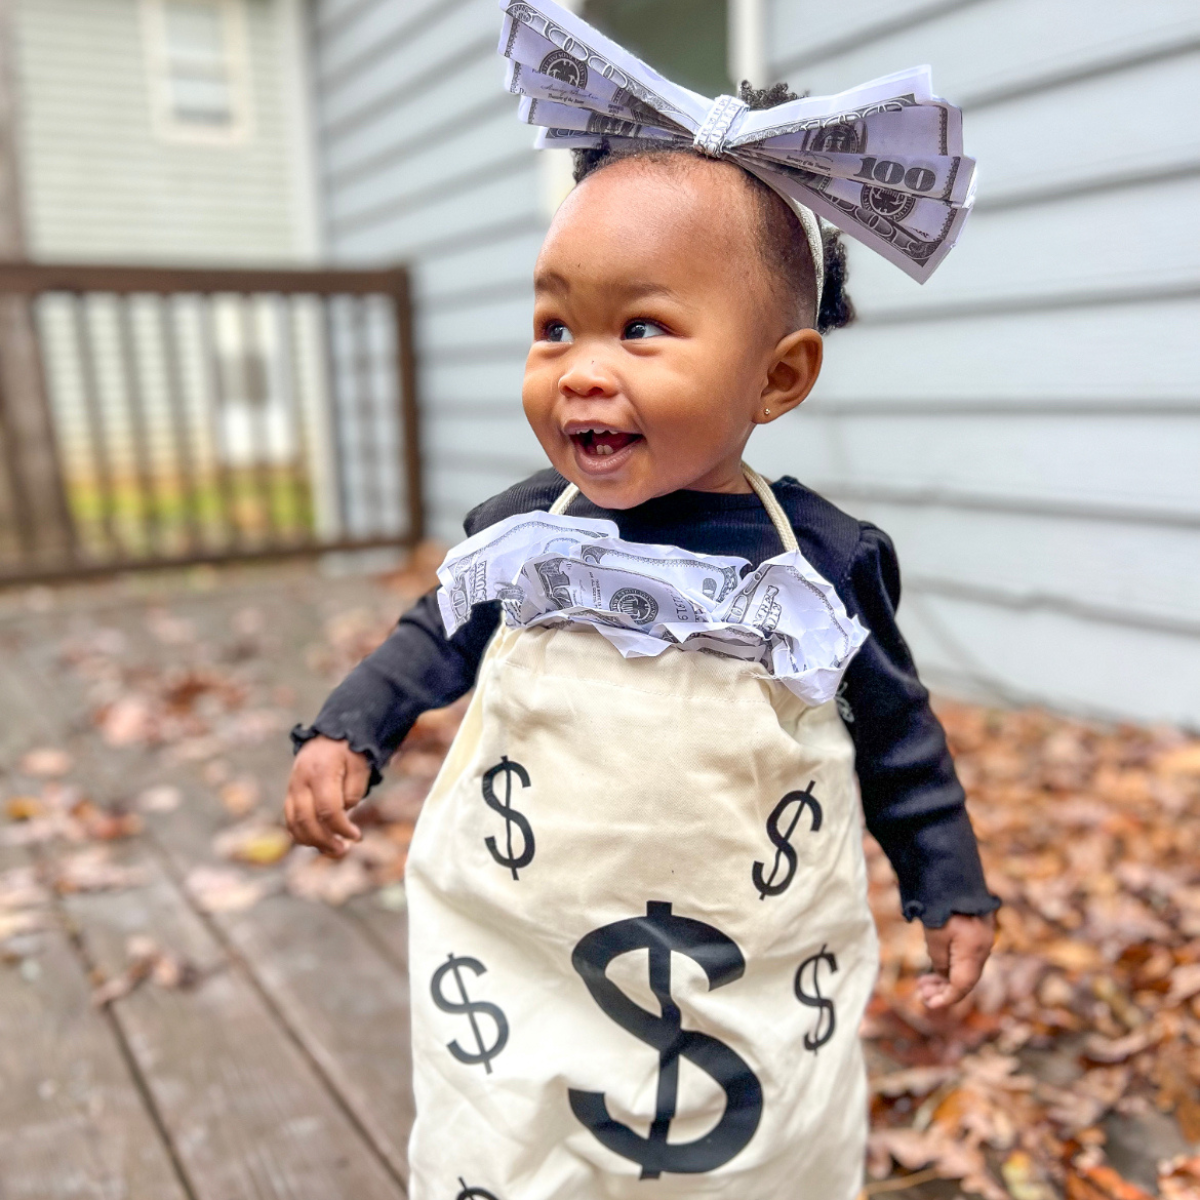 $370 for kids costumes?